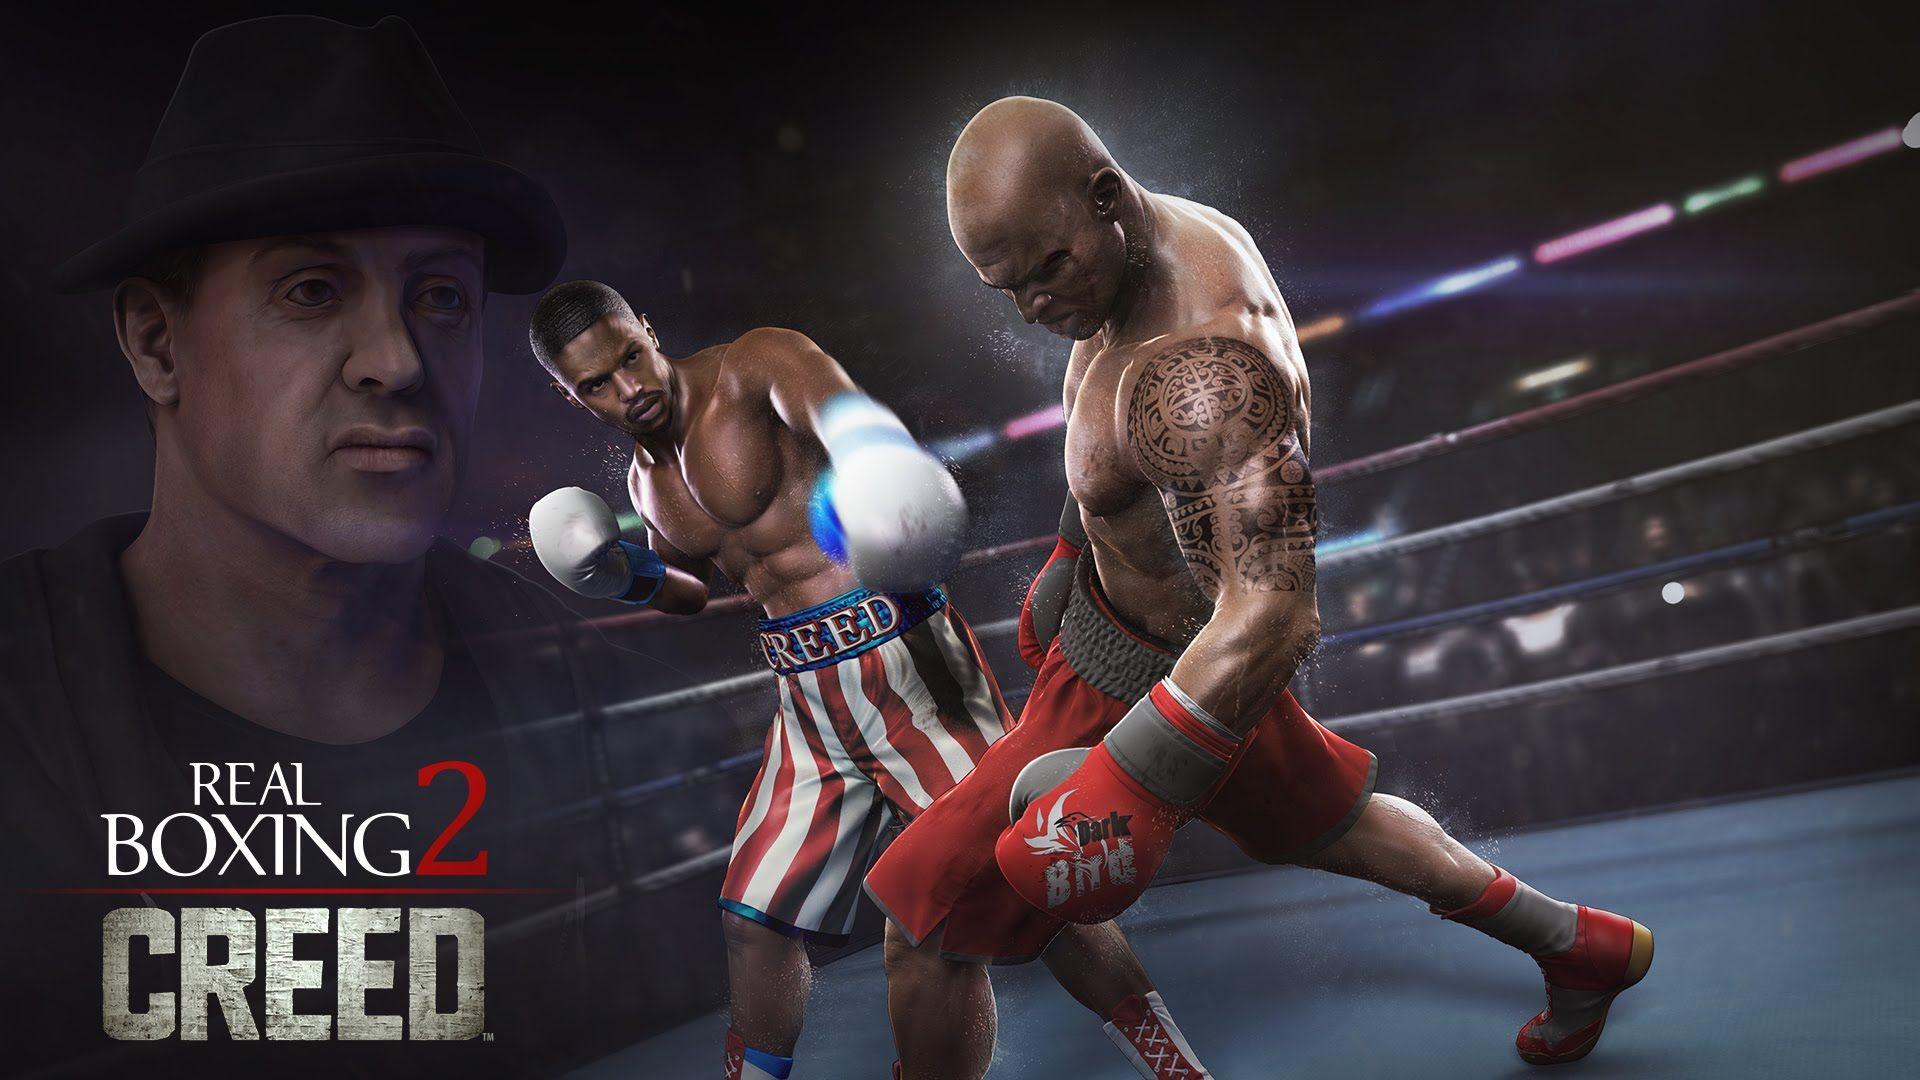 Sport box 2. Real Boxing 2 Creed. Real Boxing 2 боксеры. Real Boxing 2 Rocky (real Boxing 2 Creed)трейлер. Бокс на Xbox Rocky.